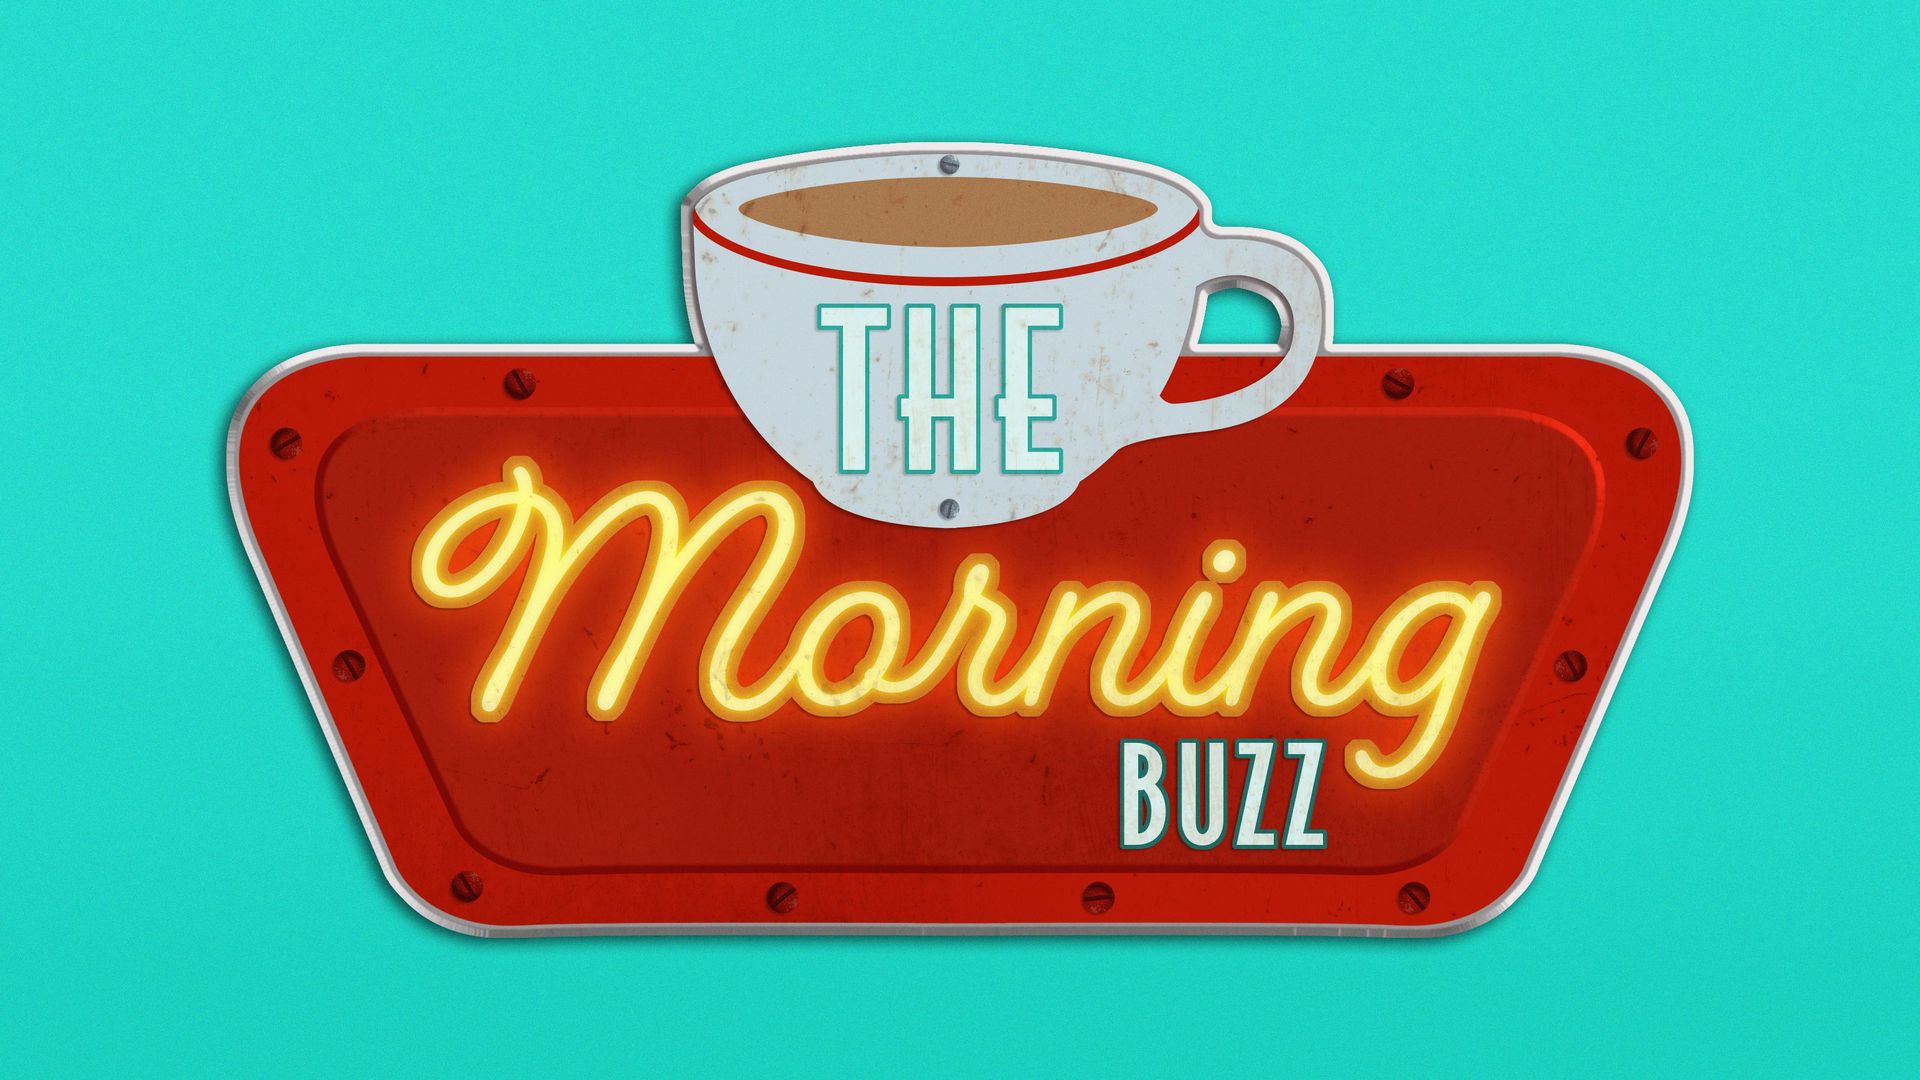 Illustration of a retro diner style sign that says "The Morning Buzz."